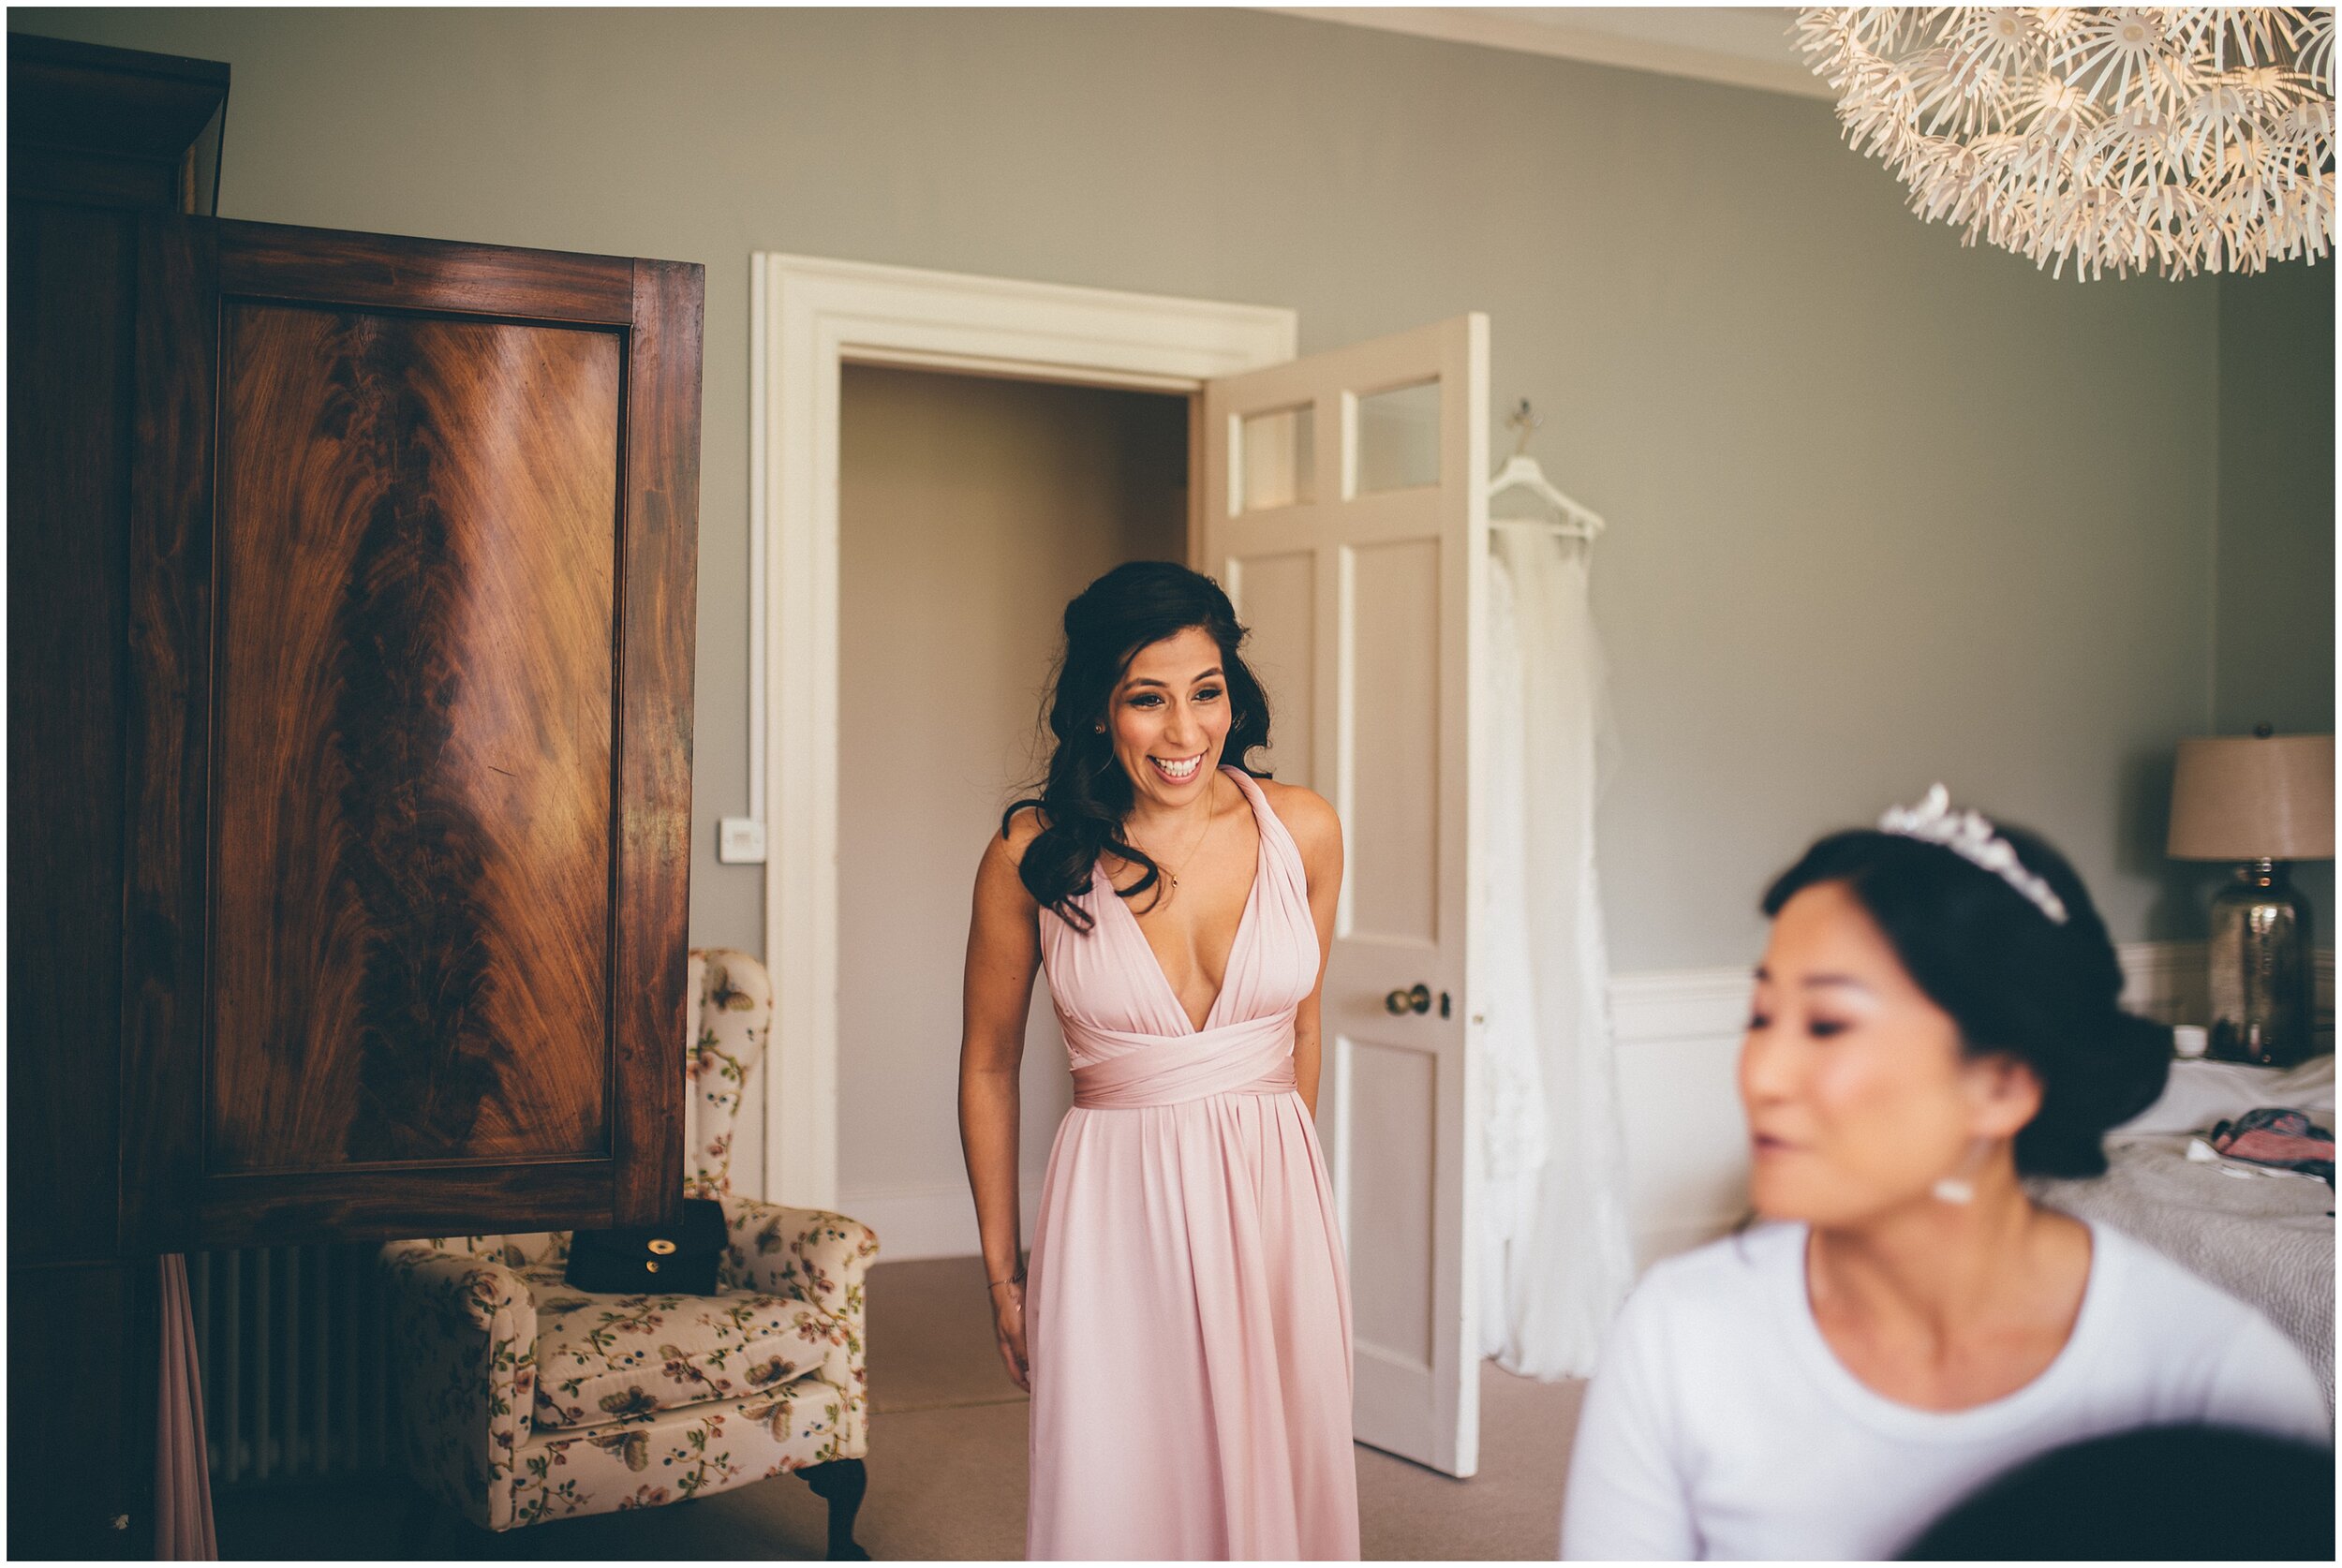 Smiling Bridesmaid sees the bride for the first time